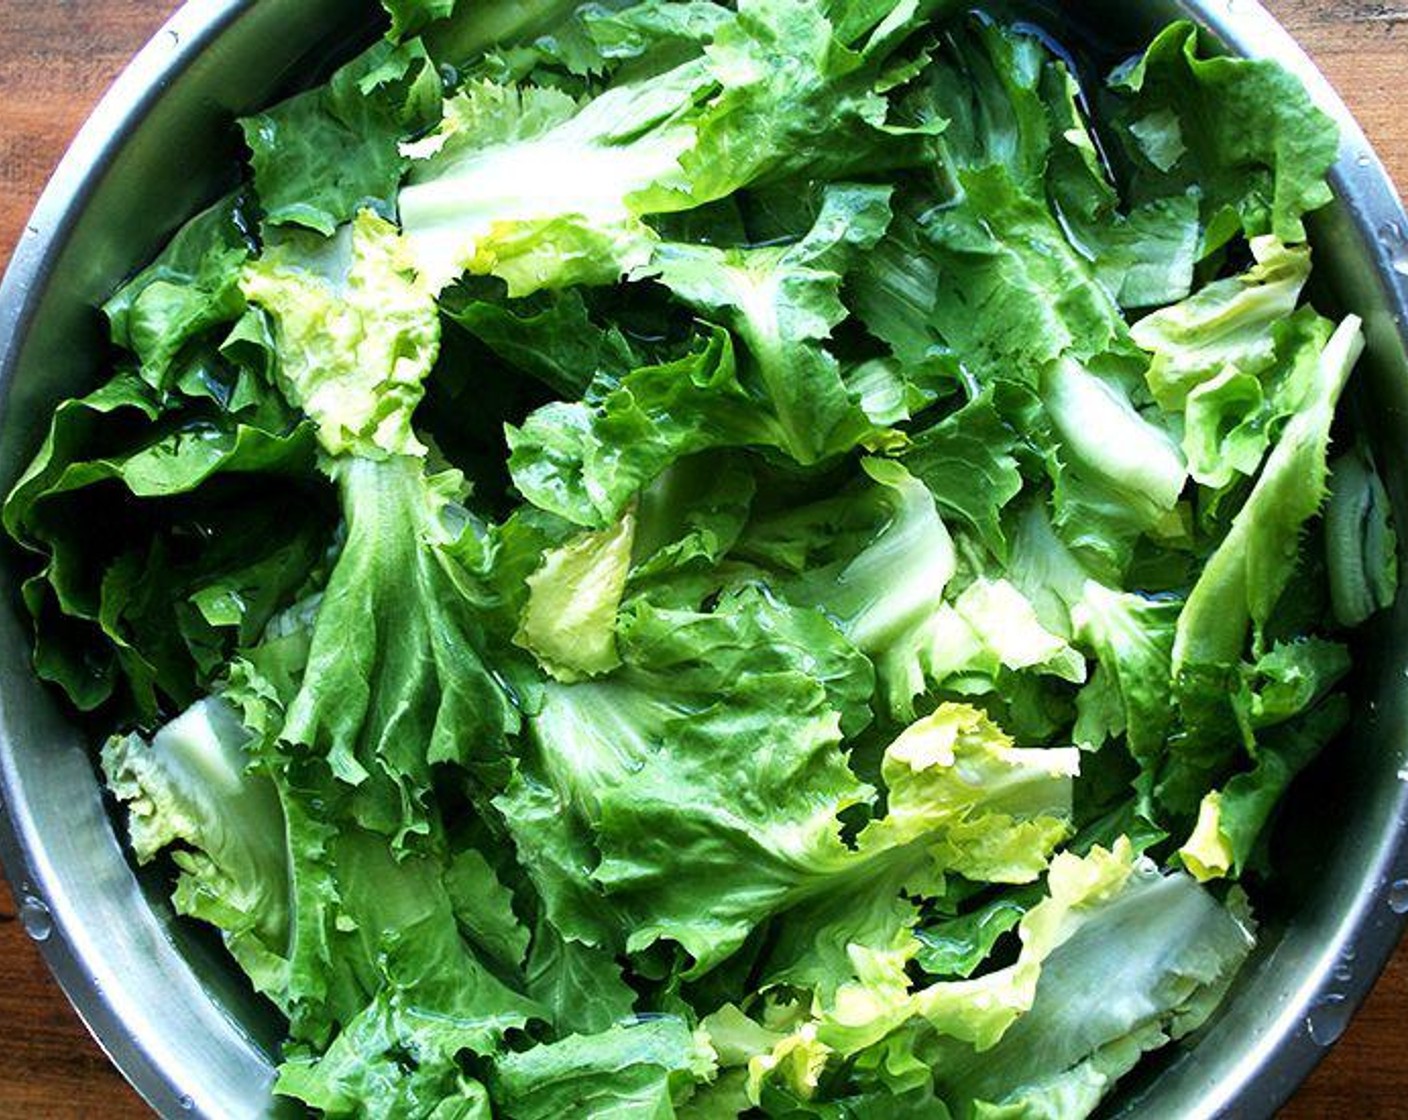 step 2 Cut the core end of the Escarole Lettuce (5 2/3 cups) off and place the leaves in a large bowl filled with cold water. Let sit for at least 5 minutes.